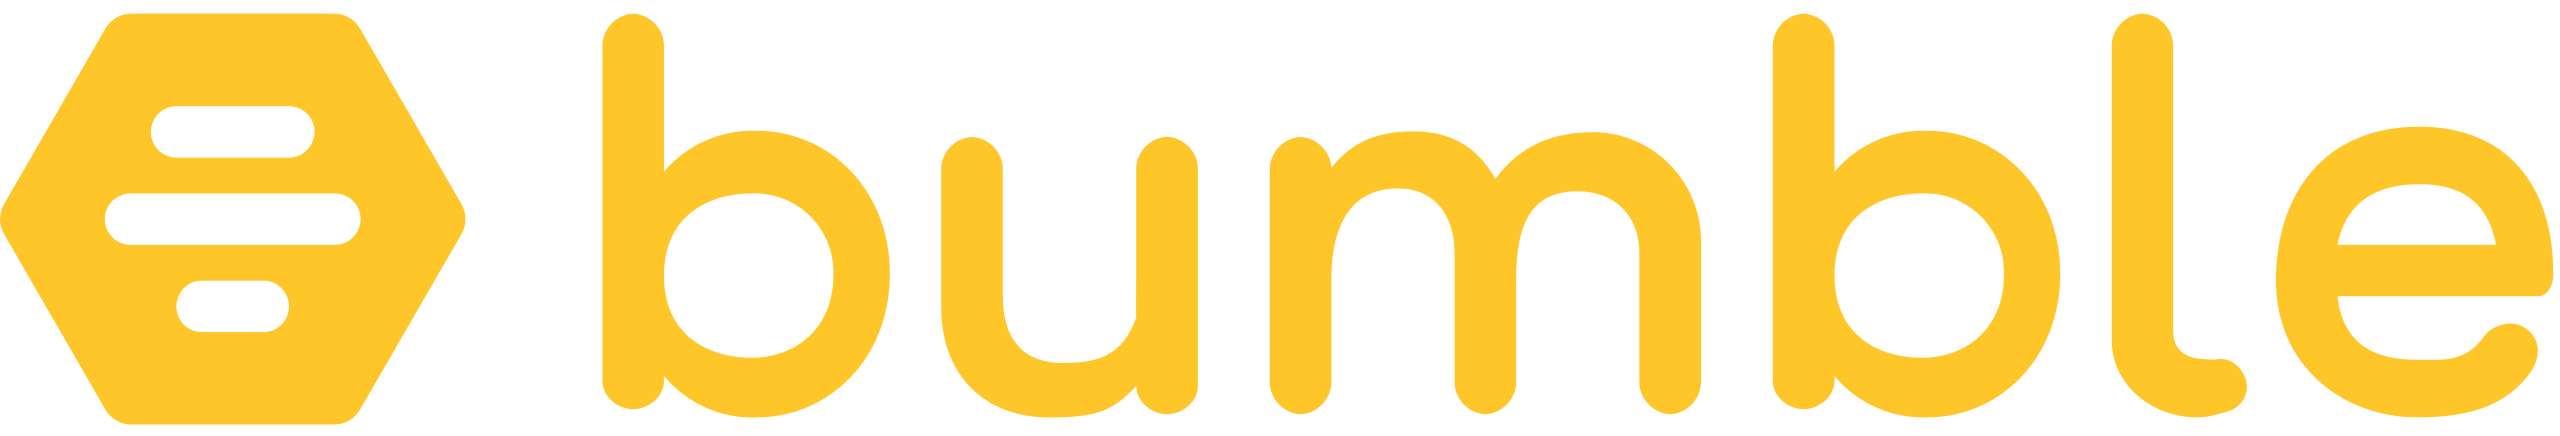 2560px-Bumble logo with wordmark.svg